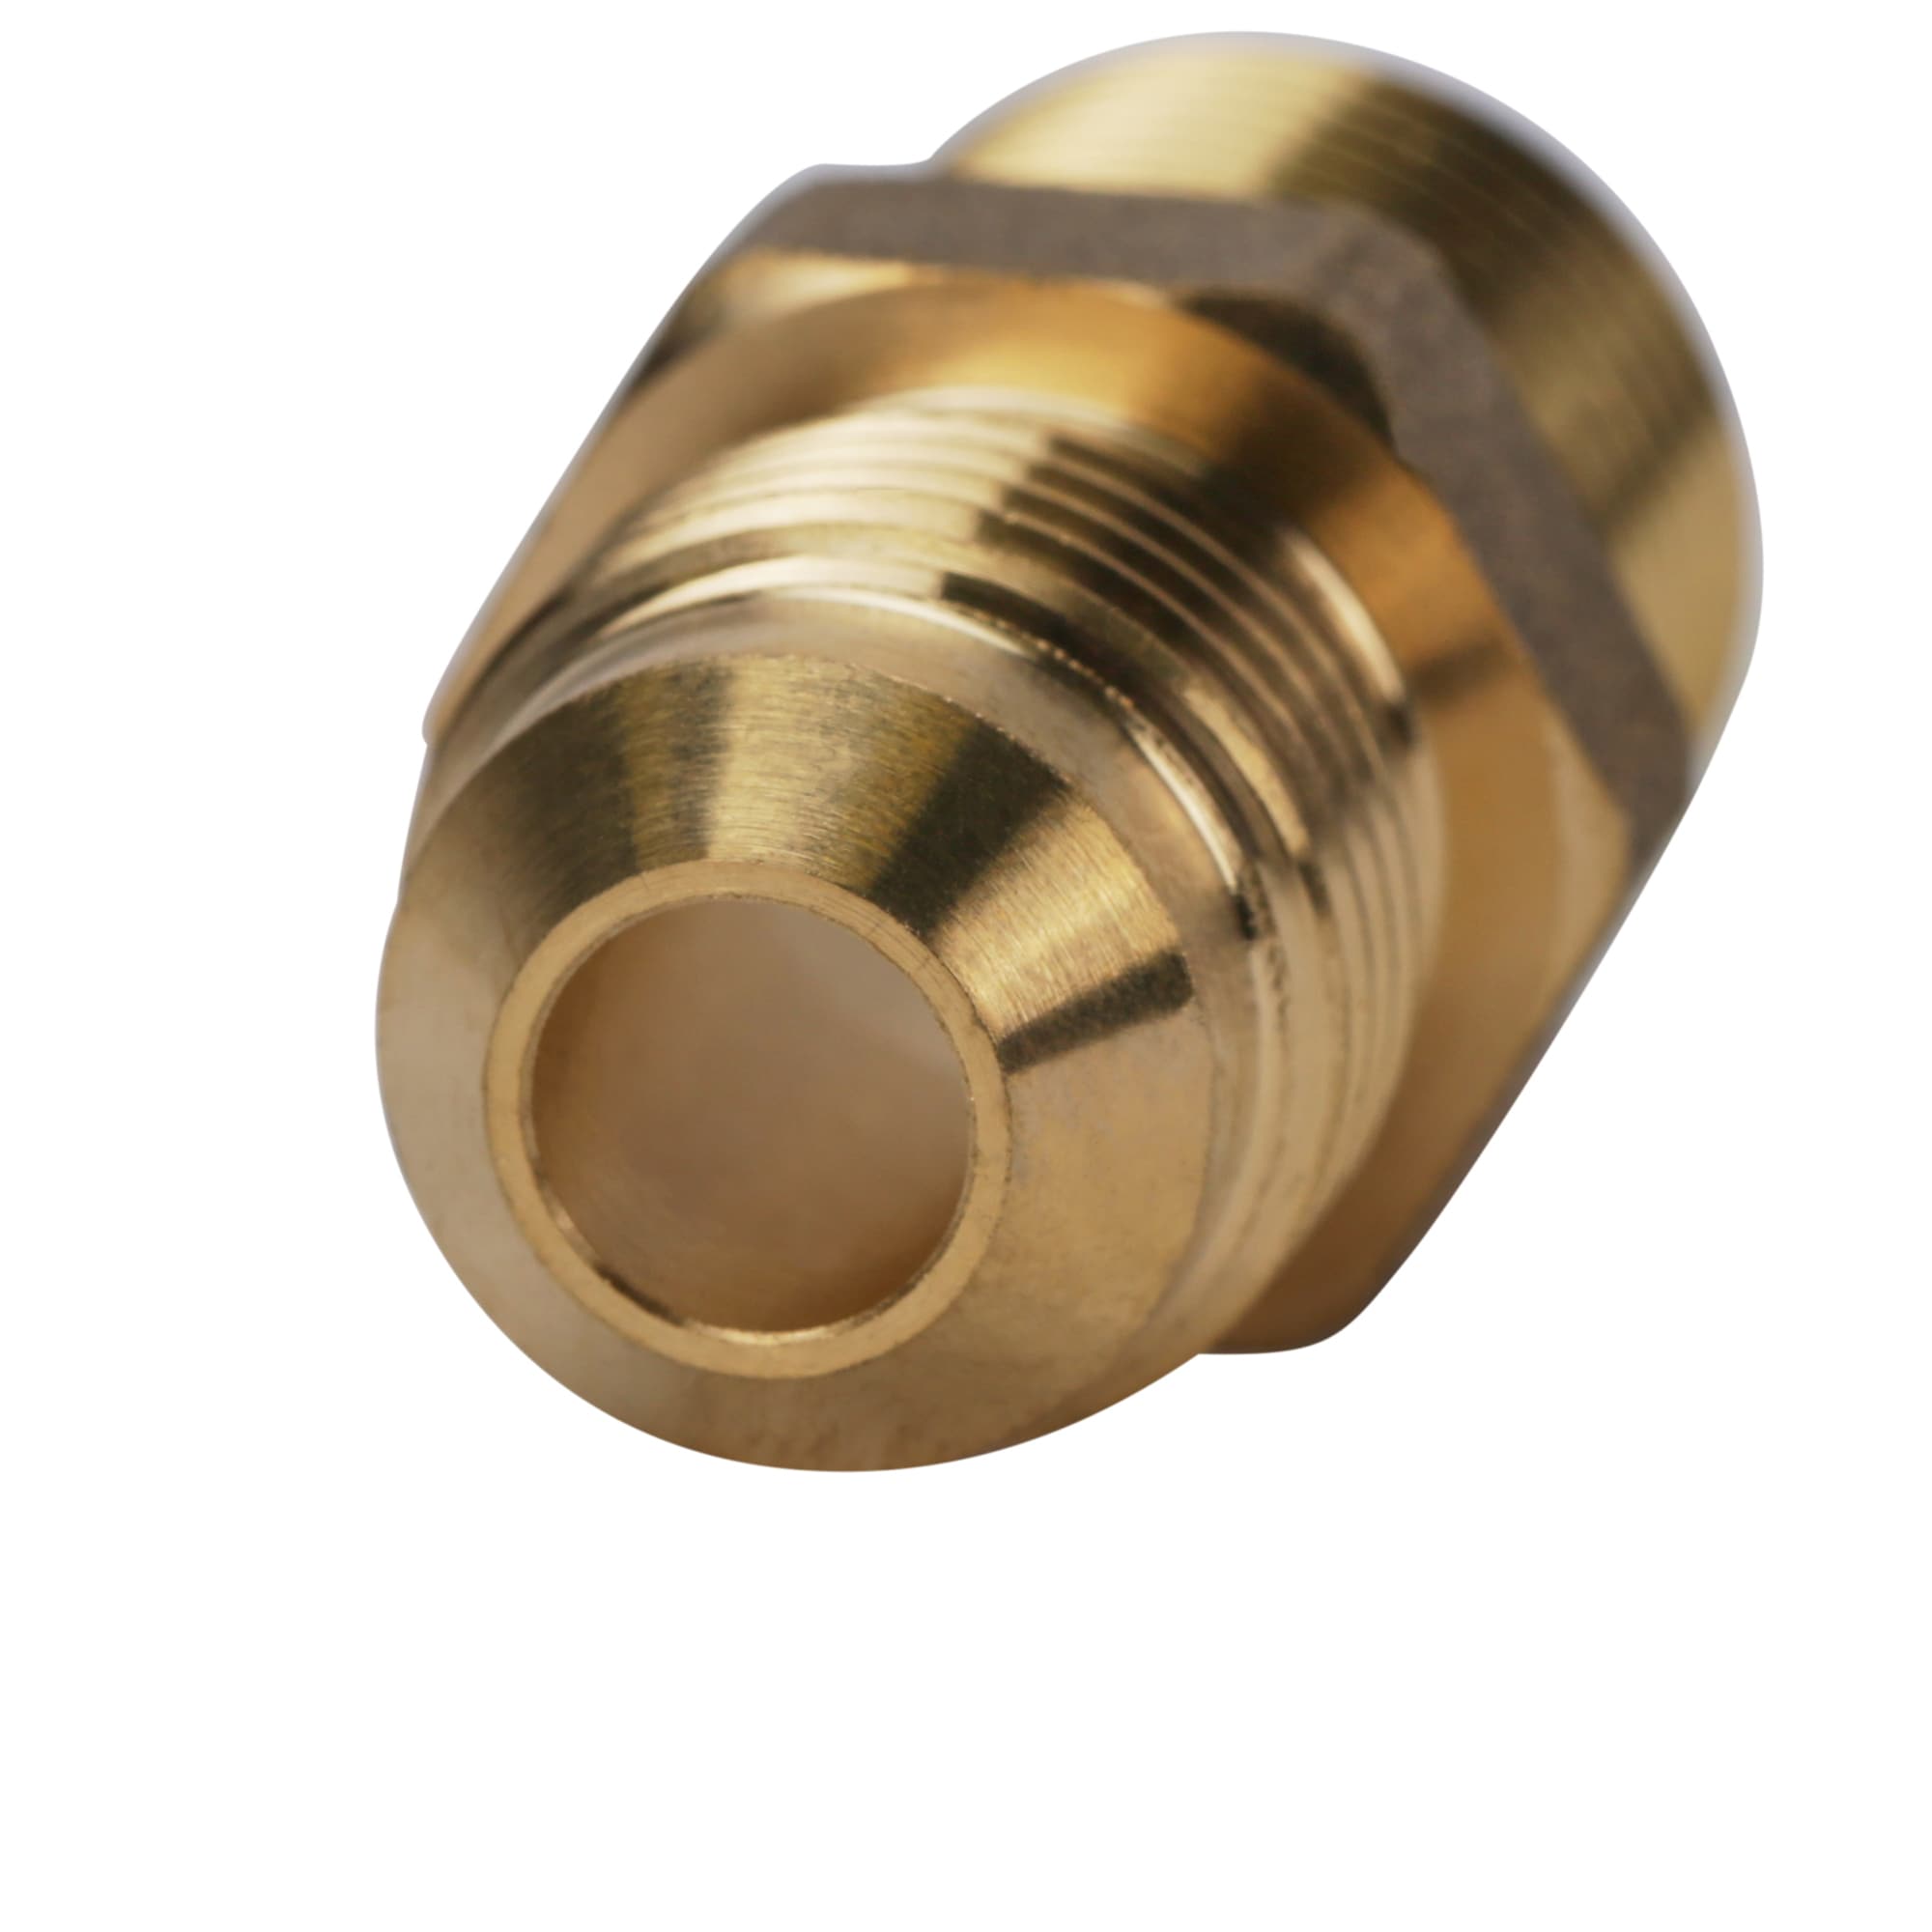 Brass, For 3/8 in x 3/8 in Tube OD, Union Elbow - 1PZZ6